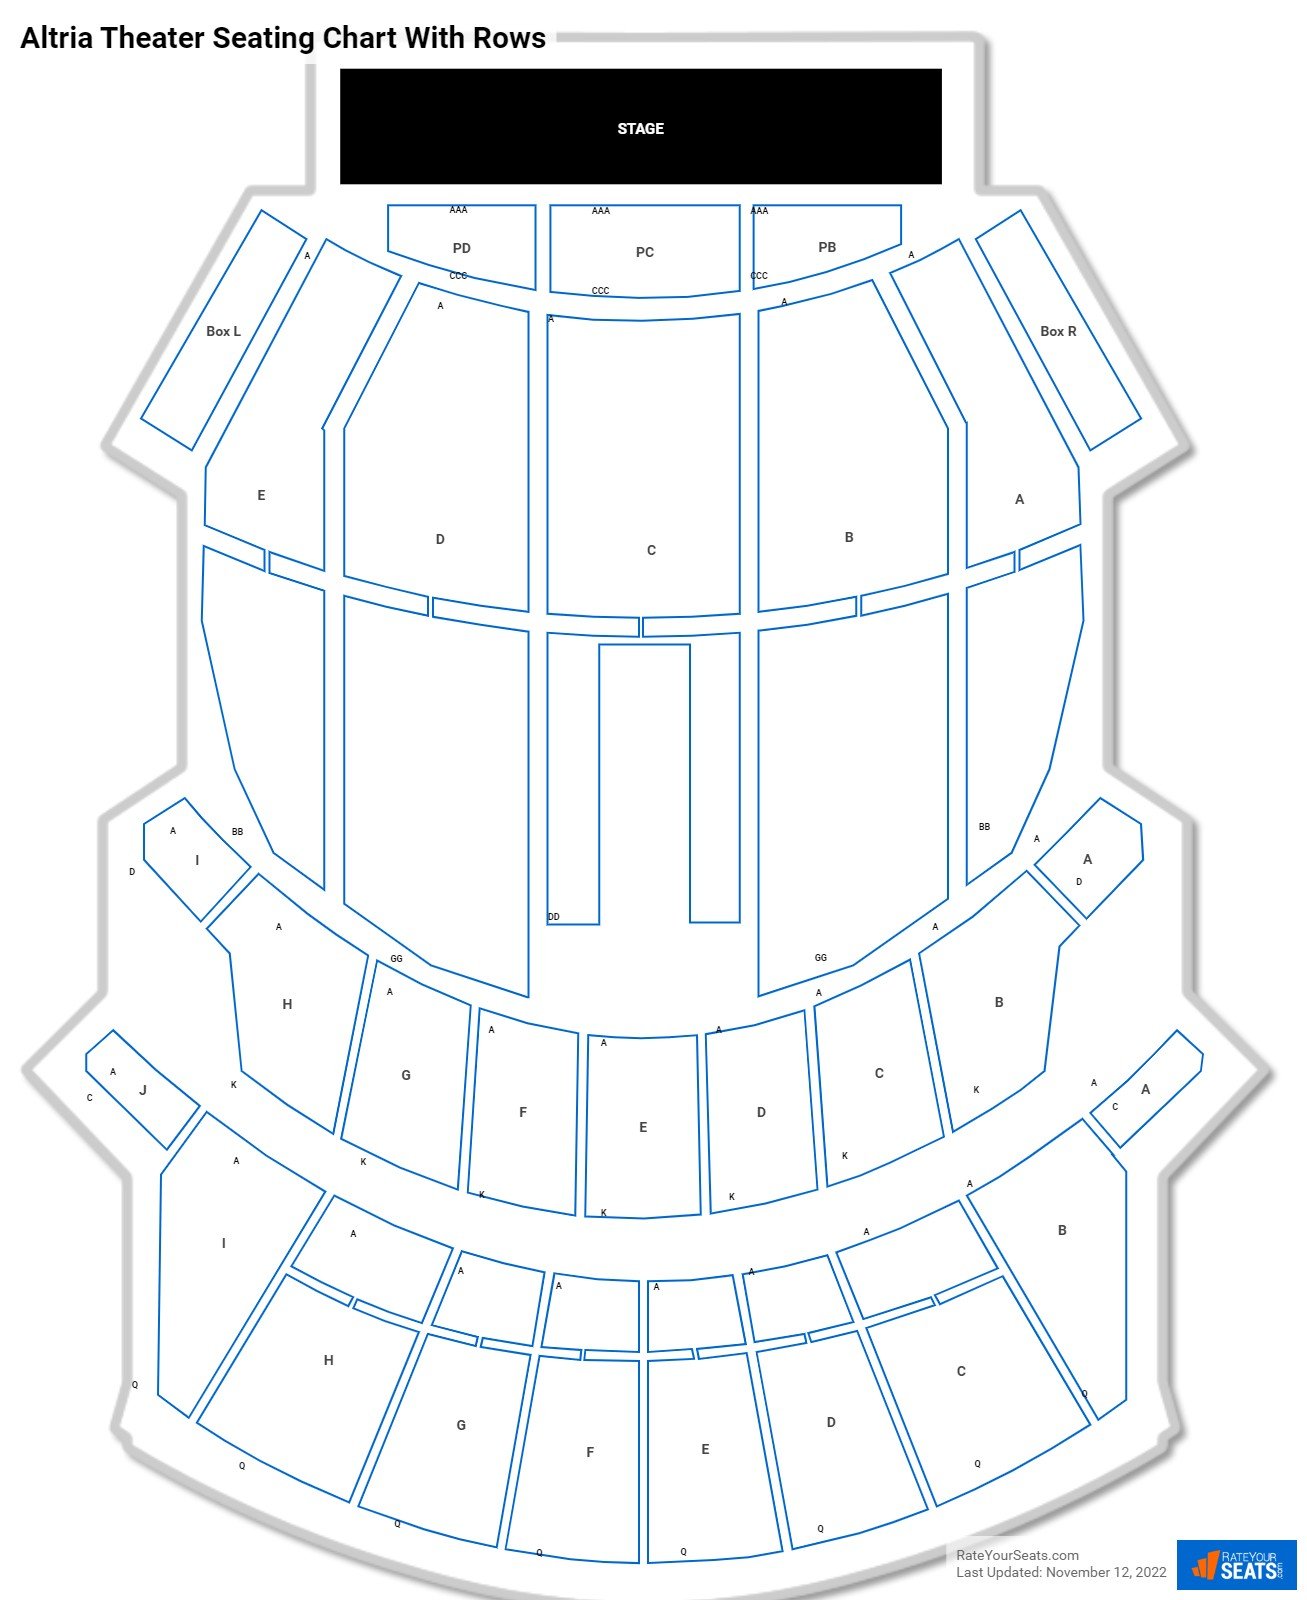 Altria Theater seating chart with row numbers